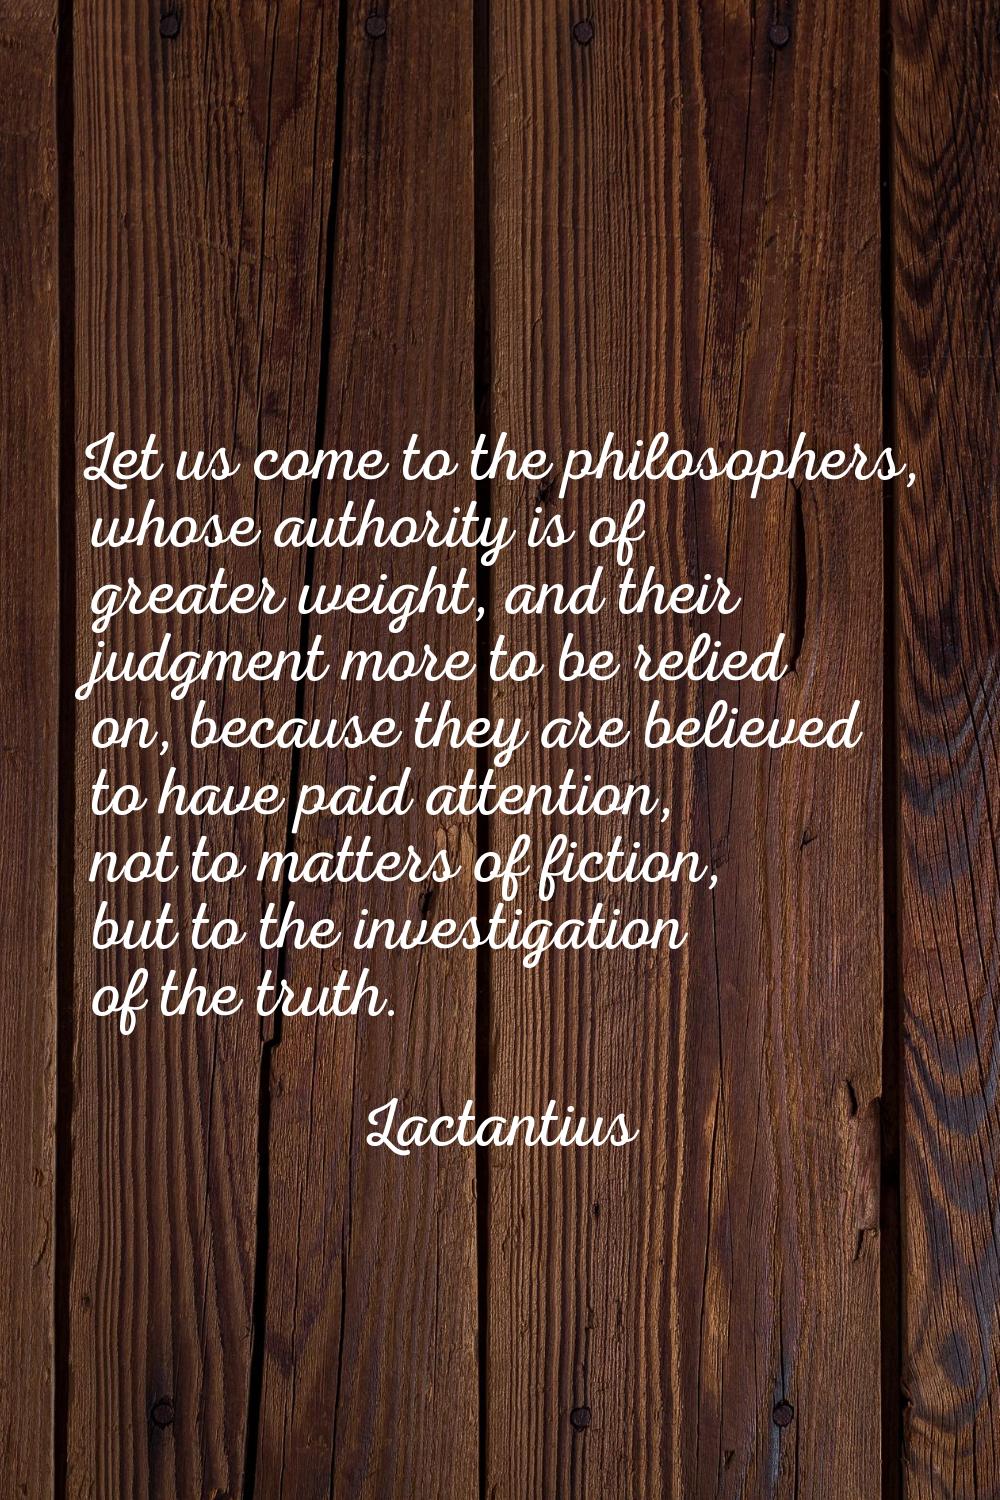 Let us come to the philosophers, whose authority is of greater weight, and their judgment more to b